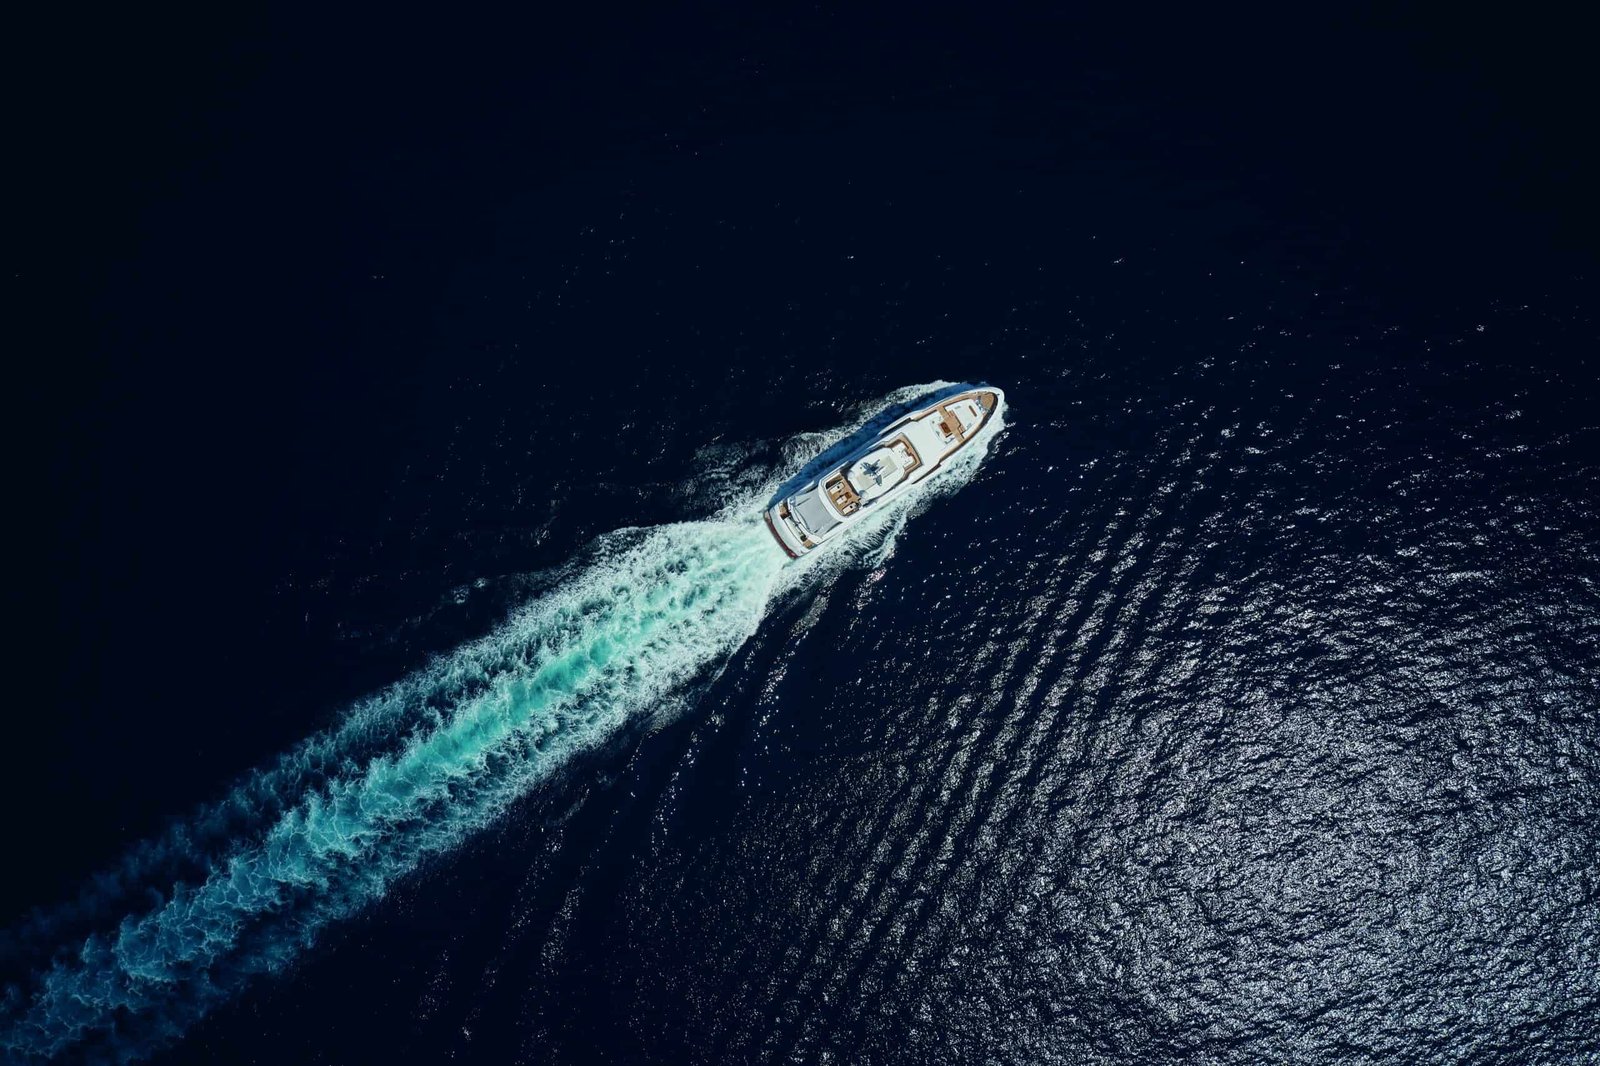 An aerial view of a luxurious boat in the ocean.